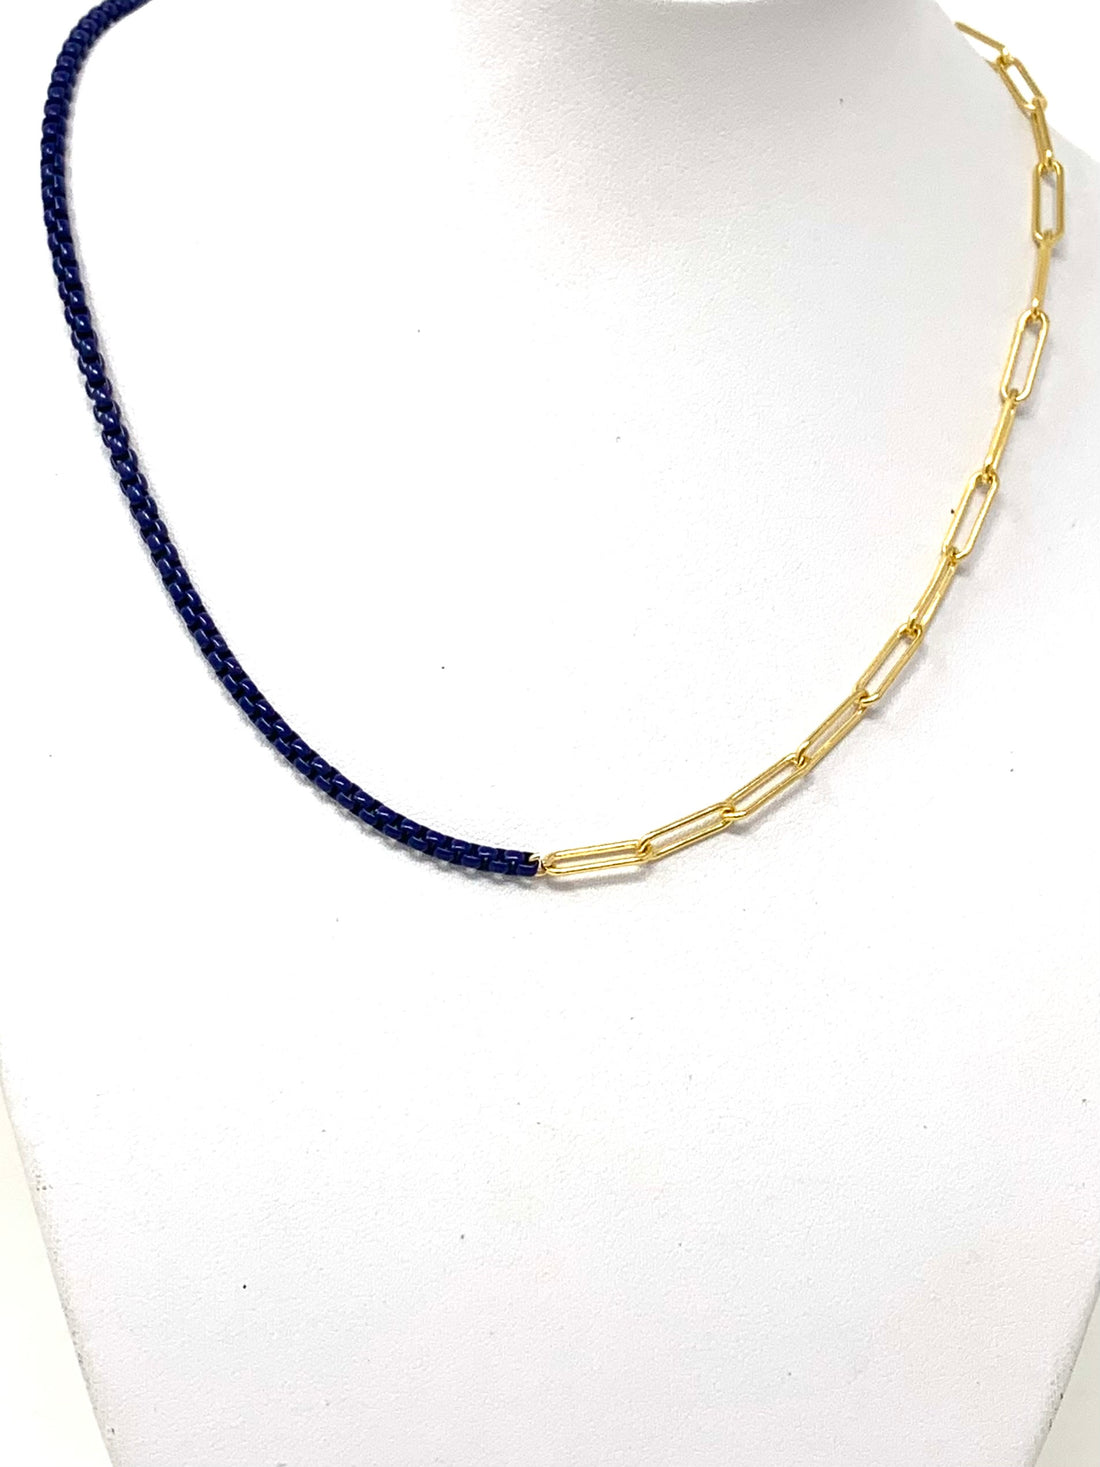 Going Dutch Chain in Navy with Gold Chainlink